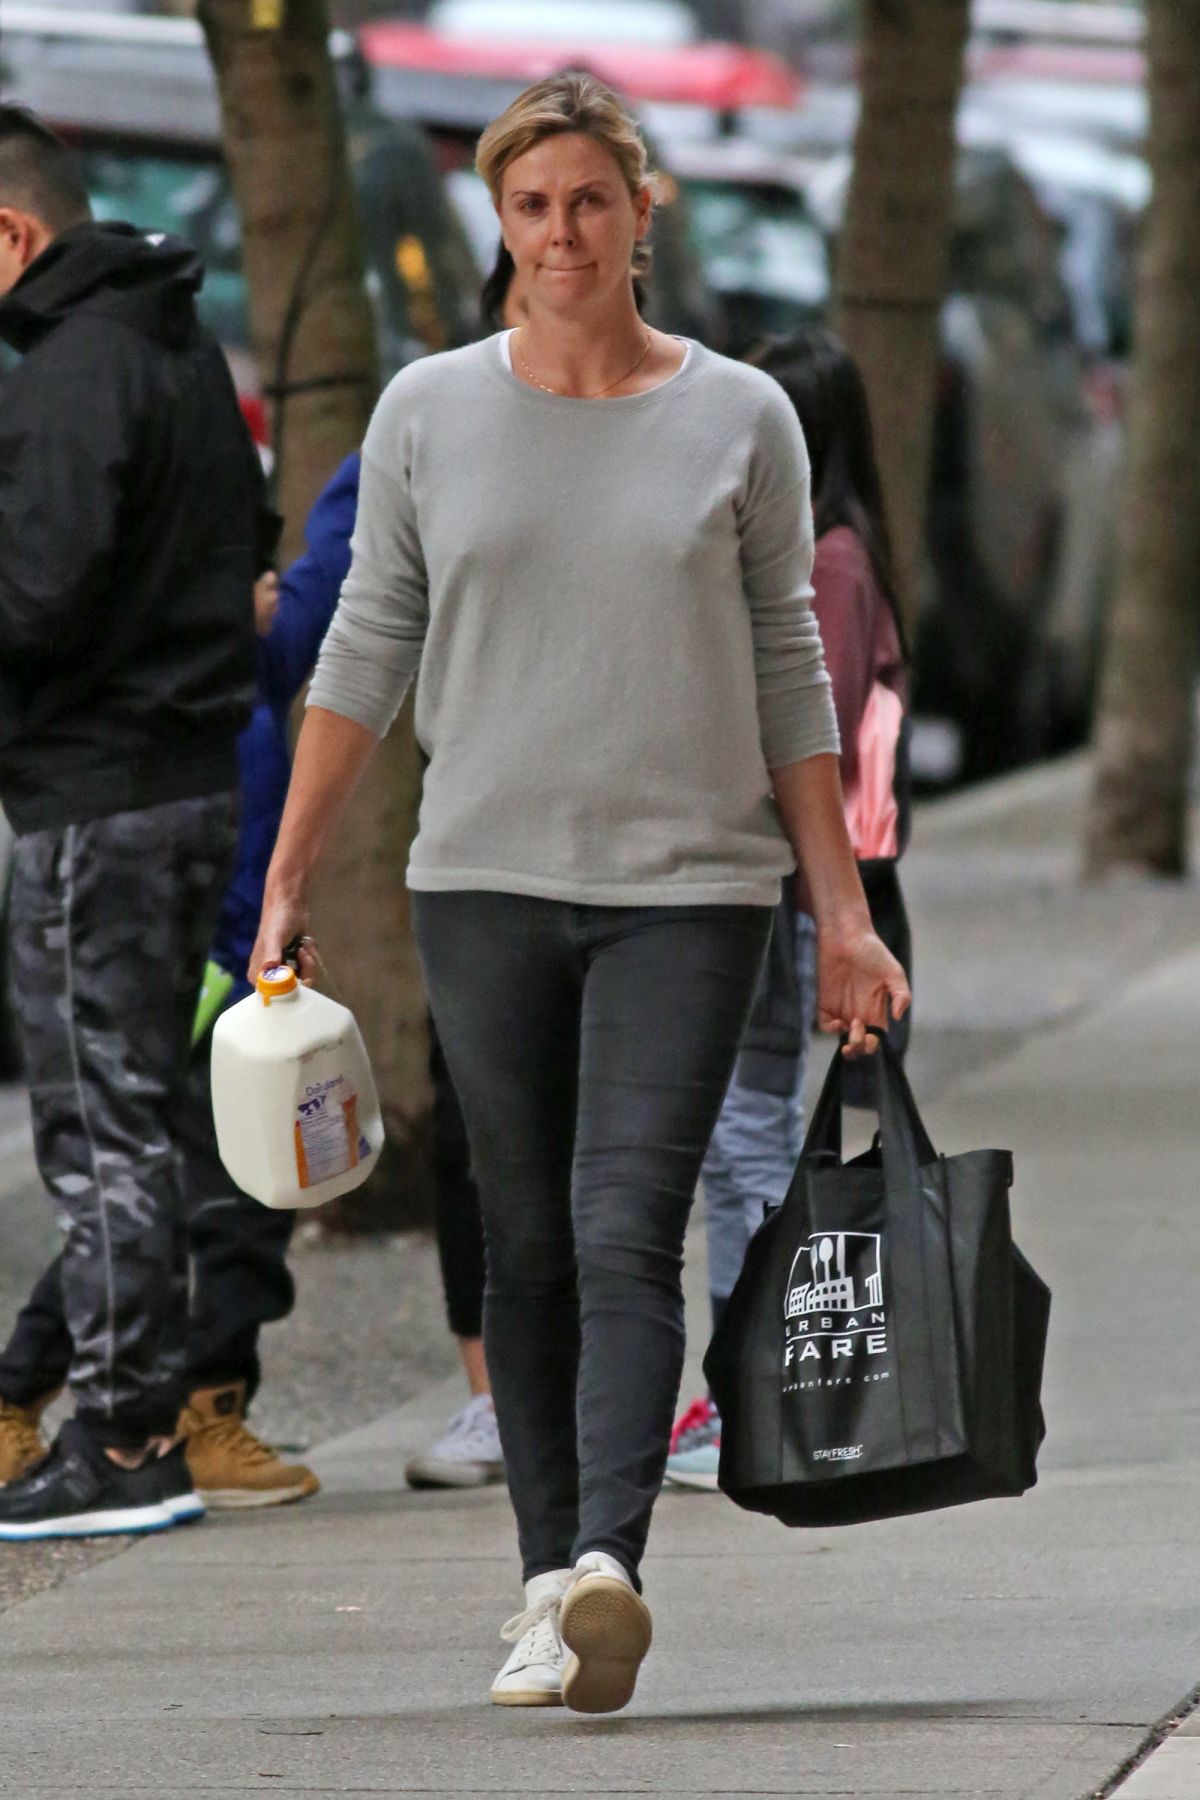 charlize-theron-out-shopping-in-vancouver-10-15-2016_7.